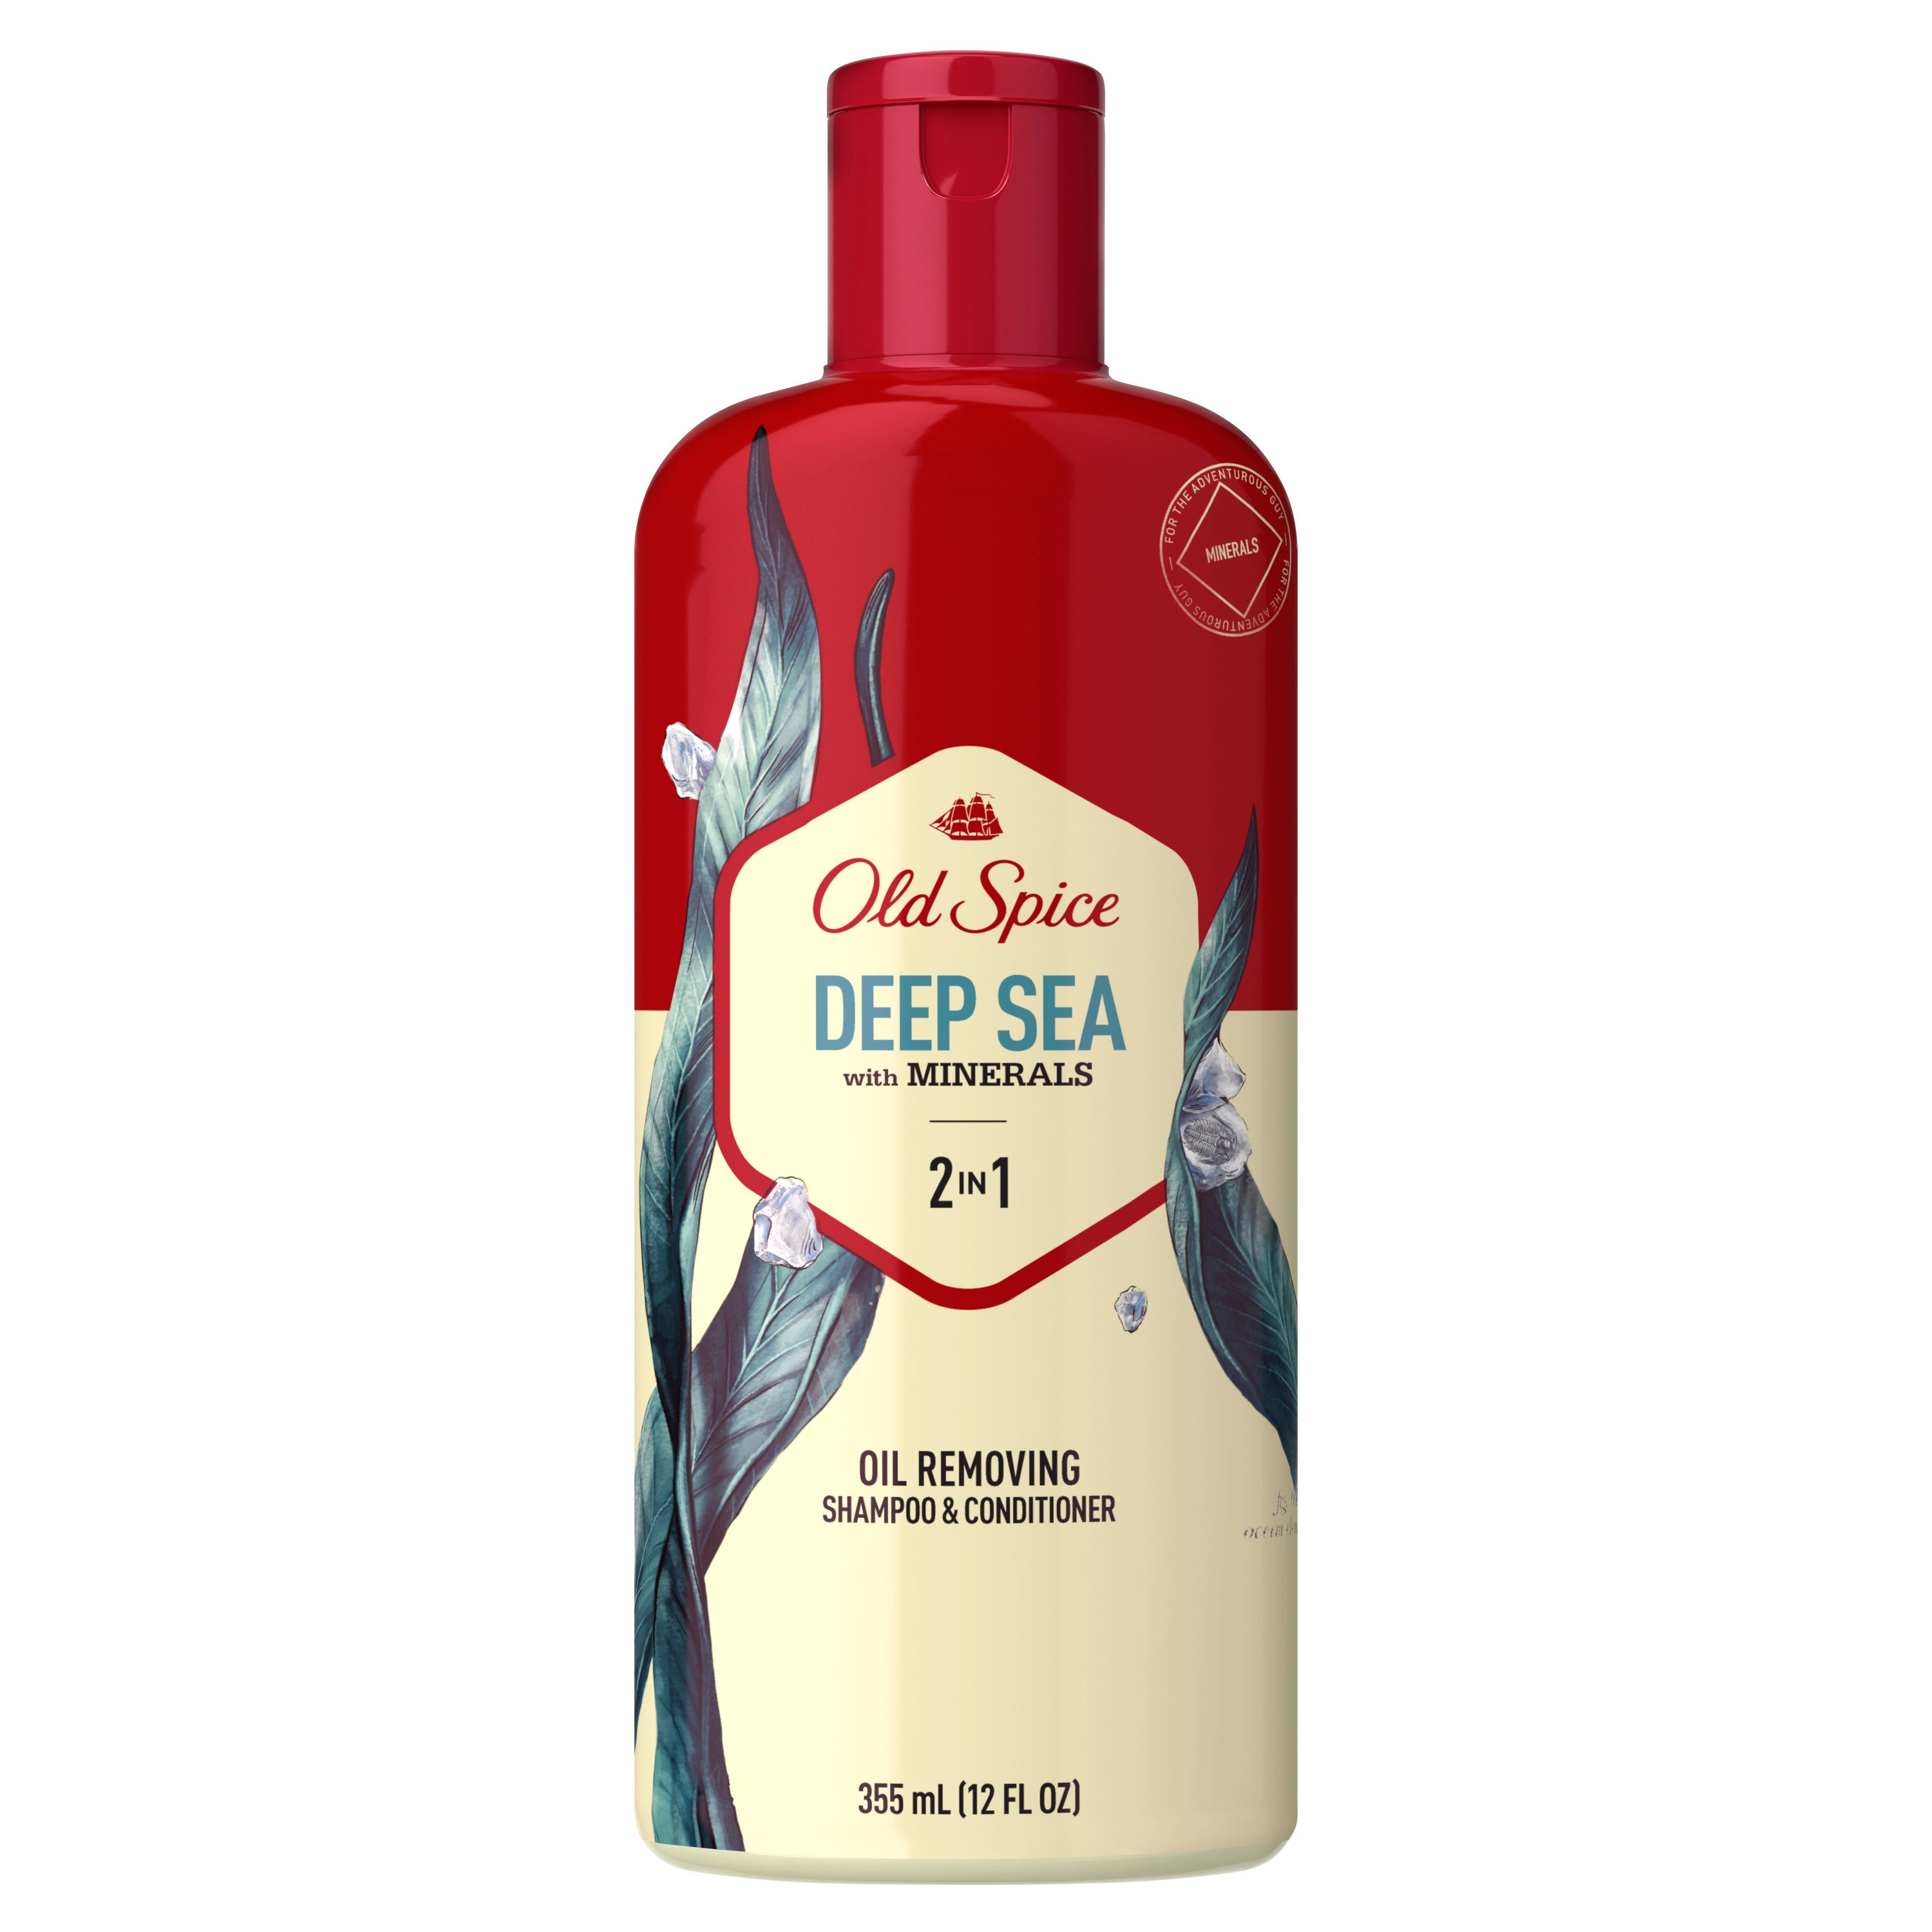 Old Spice Deep Sea with Minerals 2 in 1 Oil Removing Shampoo ...